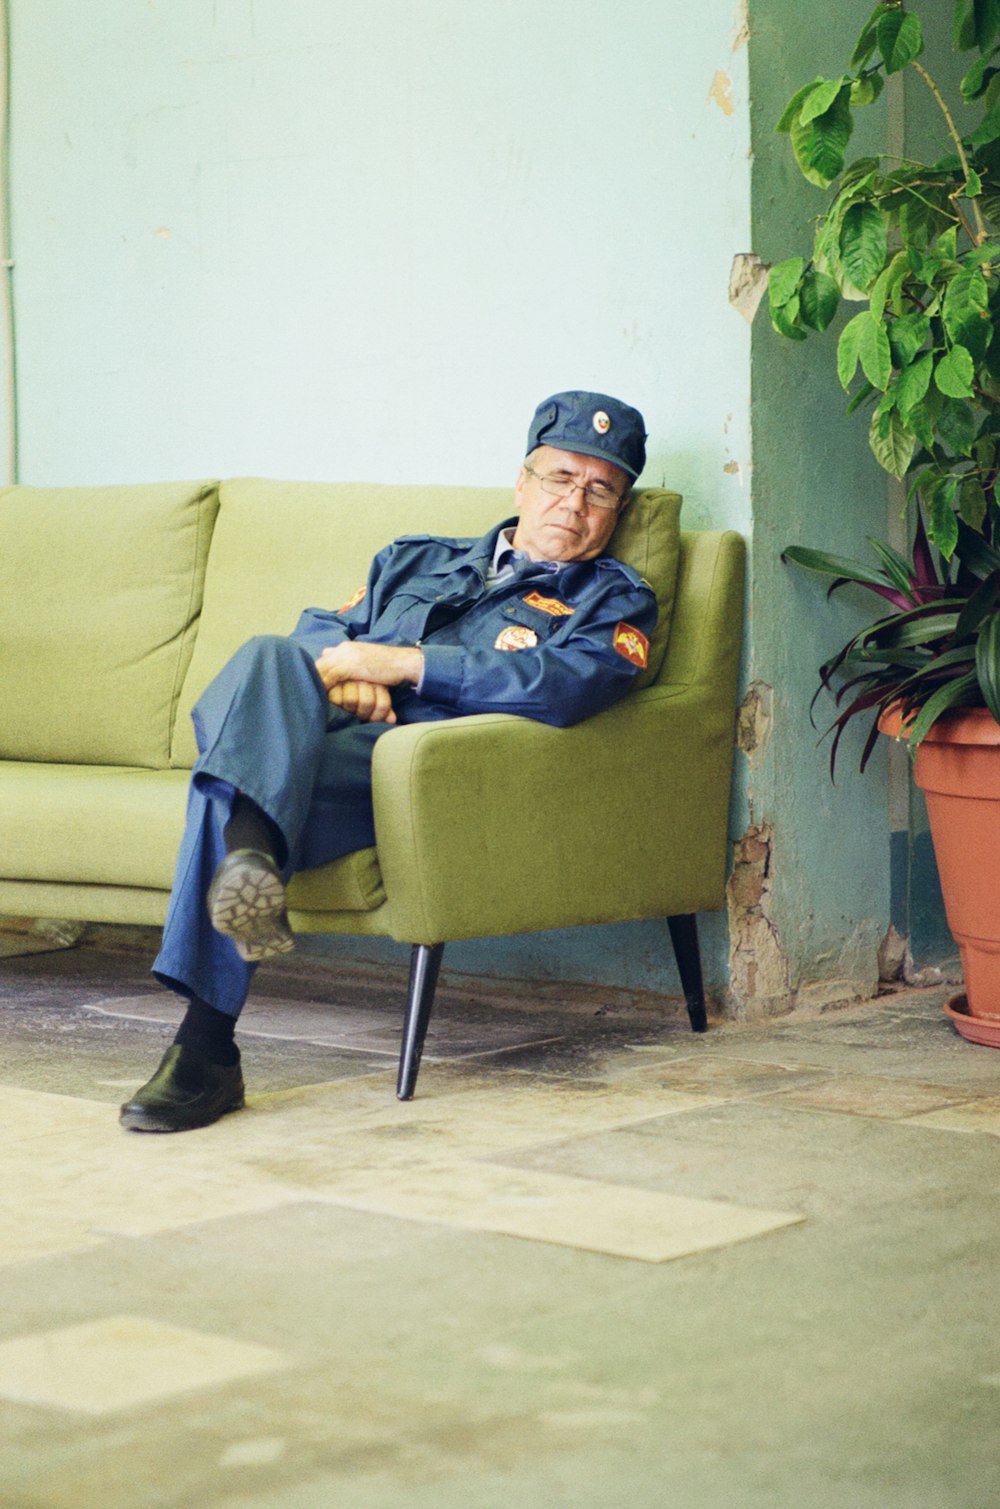 man wearing blue jacket sitting with crossed legs on green couch while sleeping